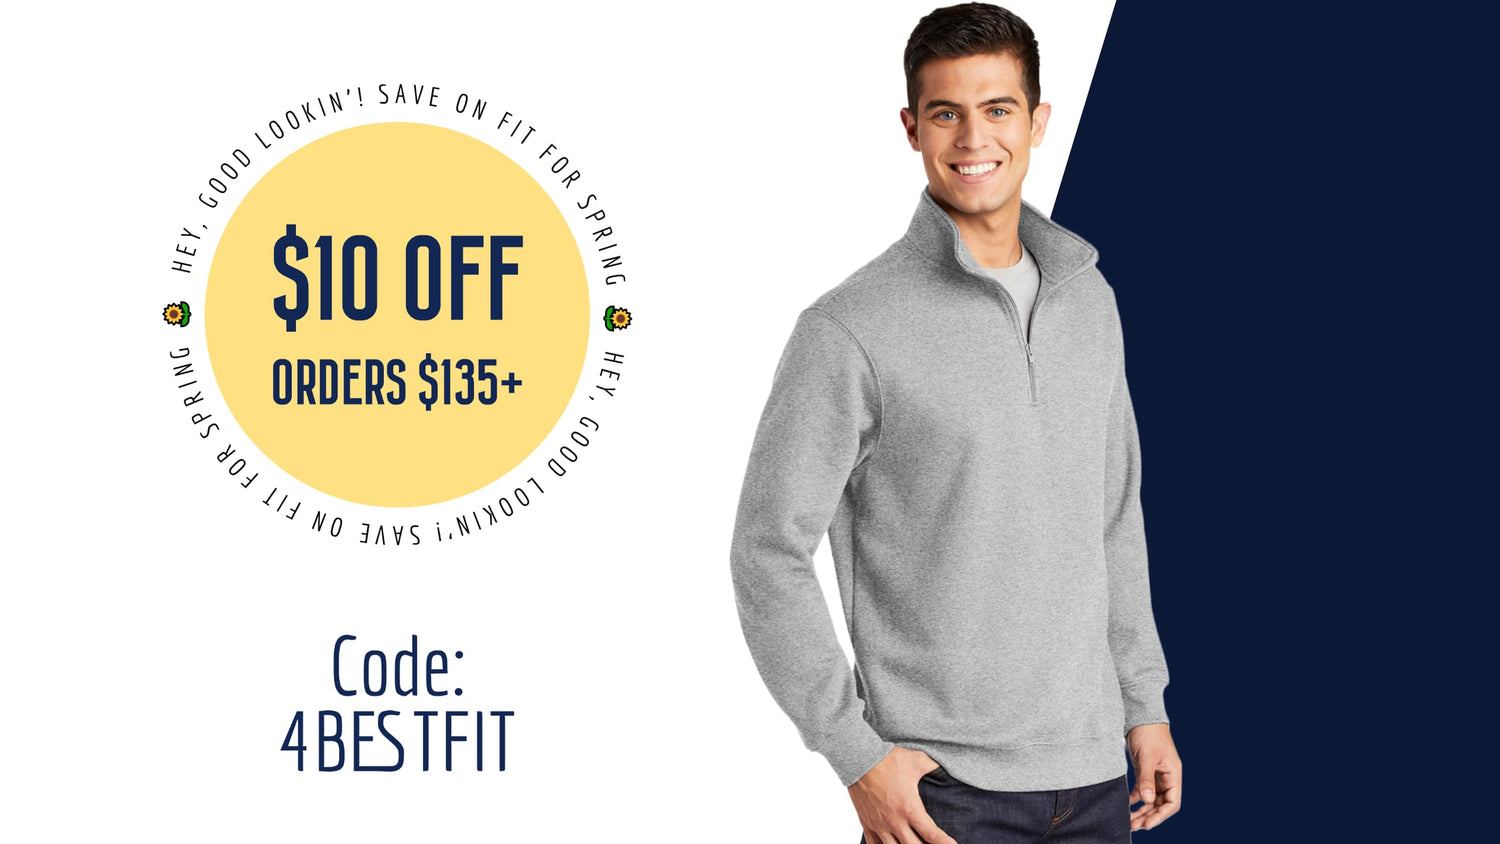 Tall and Short Men's Shirts, Sweaters, Jackets and Outerwear. Tall and Short Sizes are on Sale Now at FORtheFIT - Tall Shirts , Hoodies, Jackets and more.  Short Jackets, Shirts, and Outerwear. Short lengths and Tall lengths